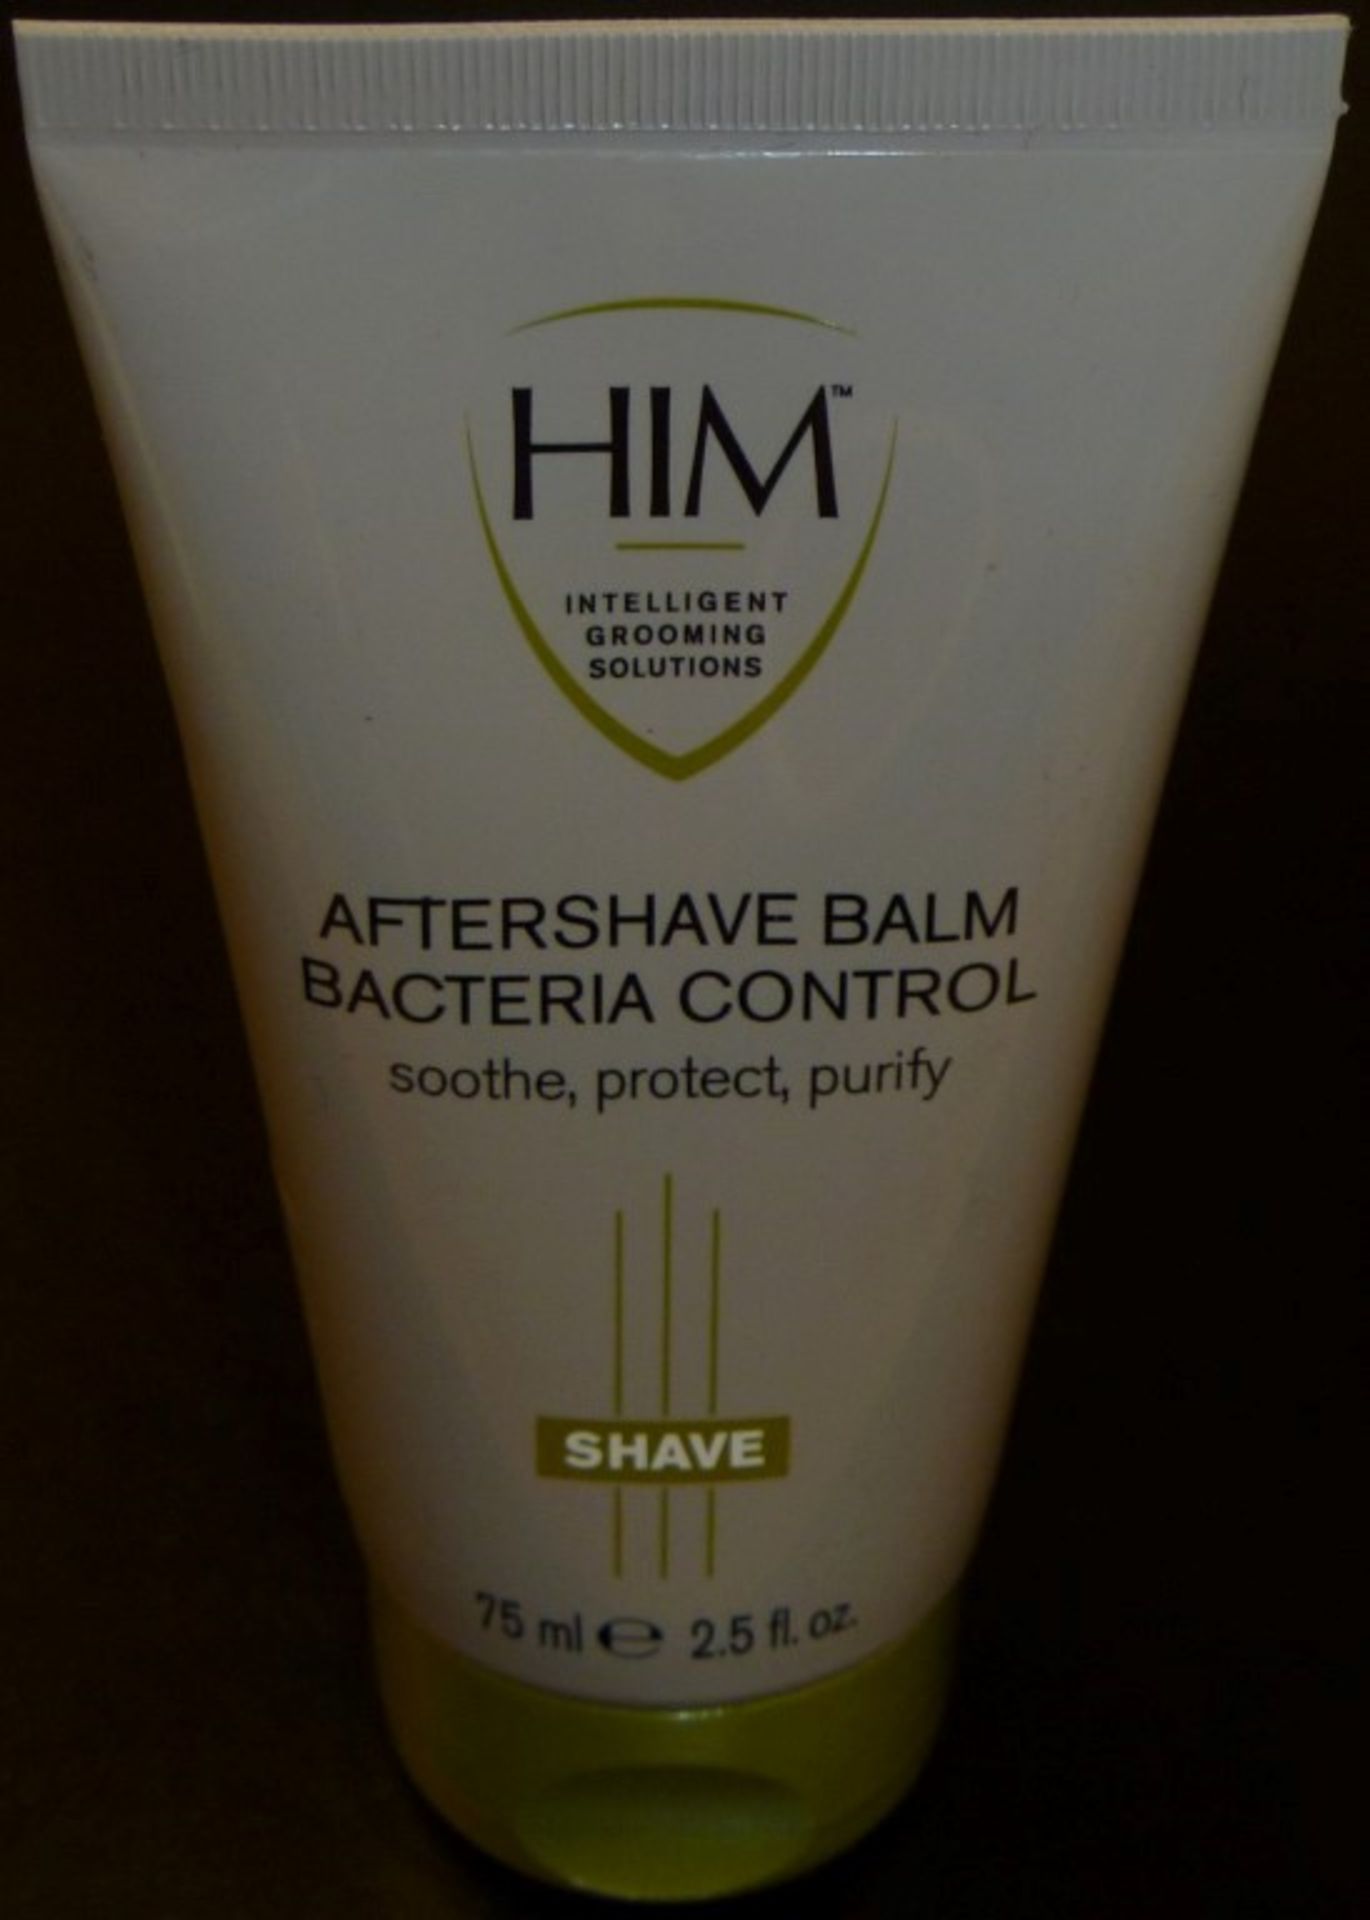 20 x HIM Intelligent Grooming Solutions - 75ml AFTERSHAVE BALM BACTERIA CONTROL - Brand New - Image 3 of 3